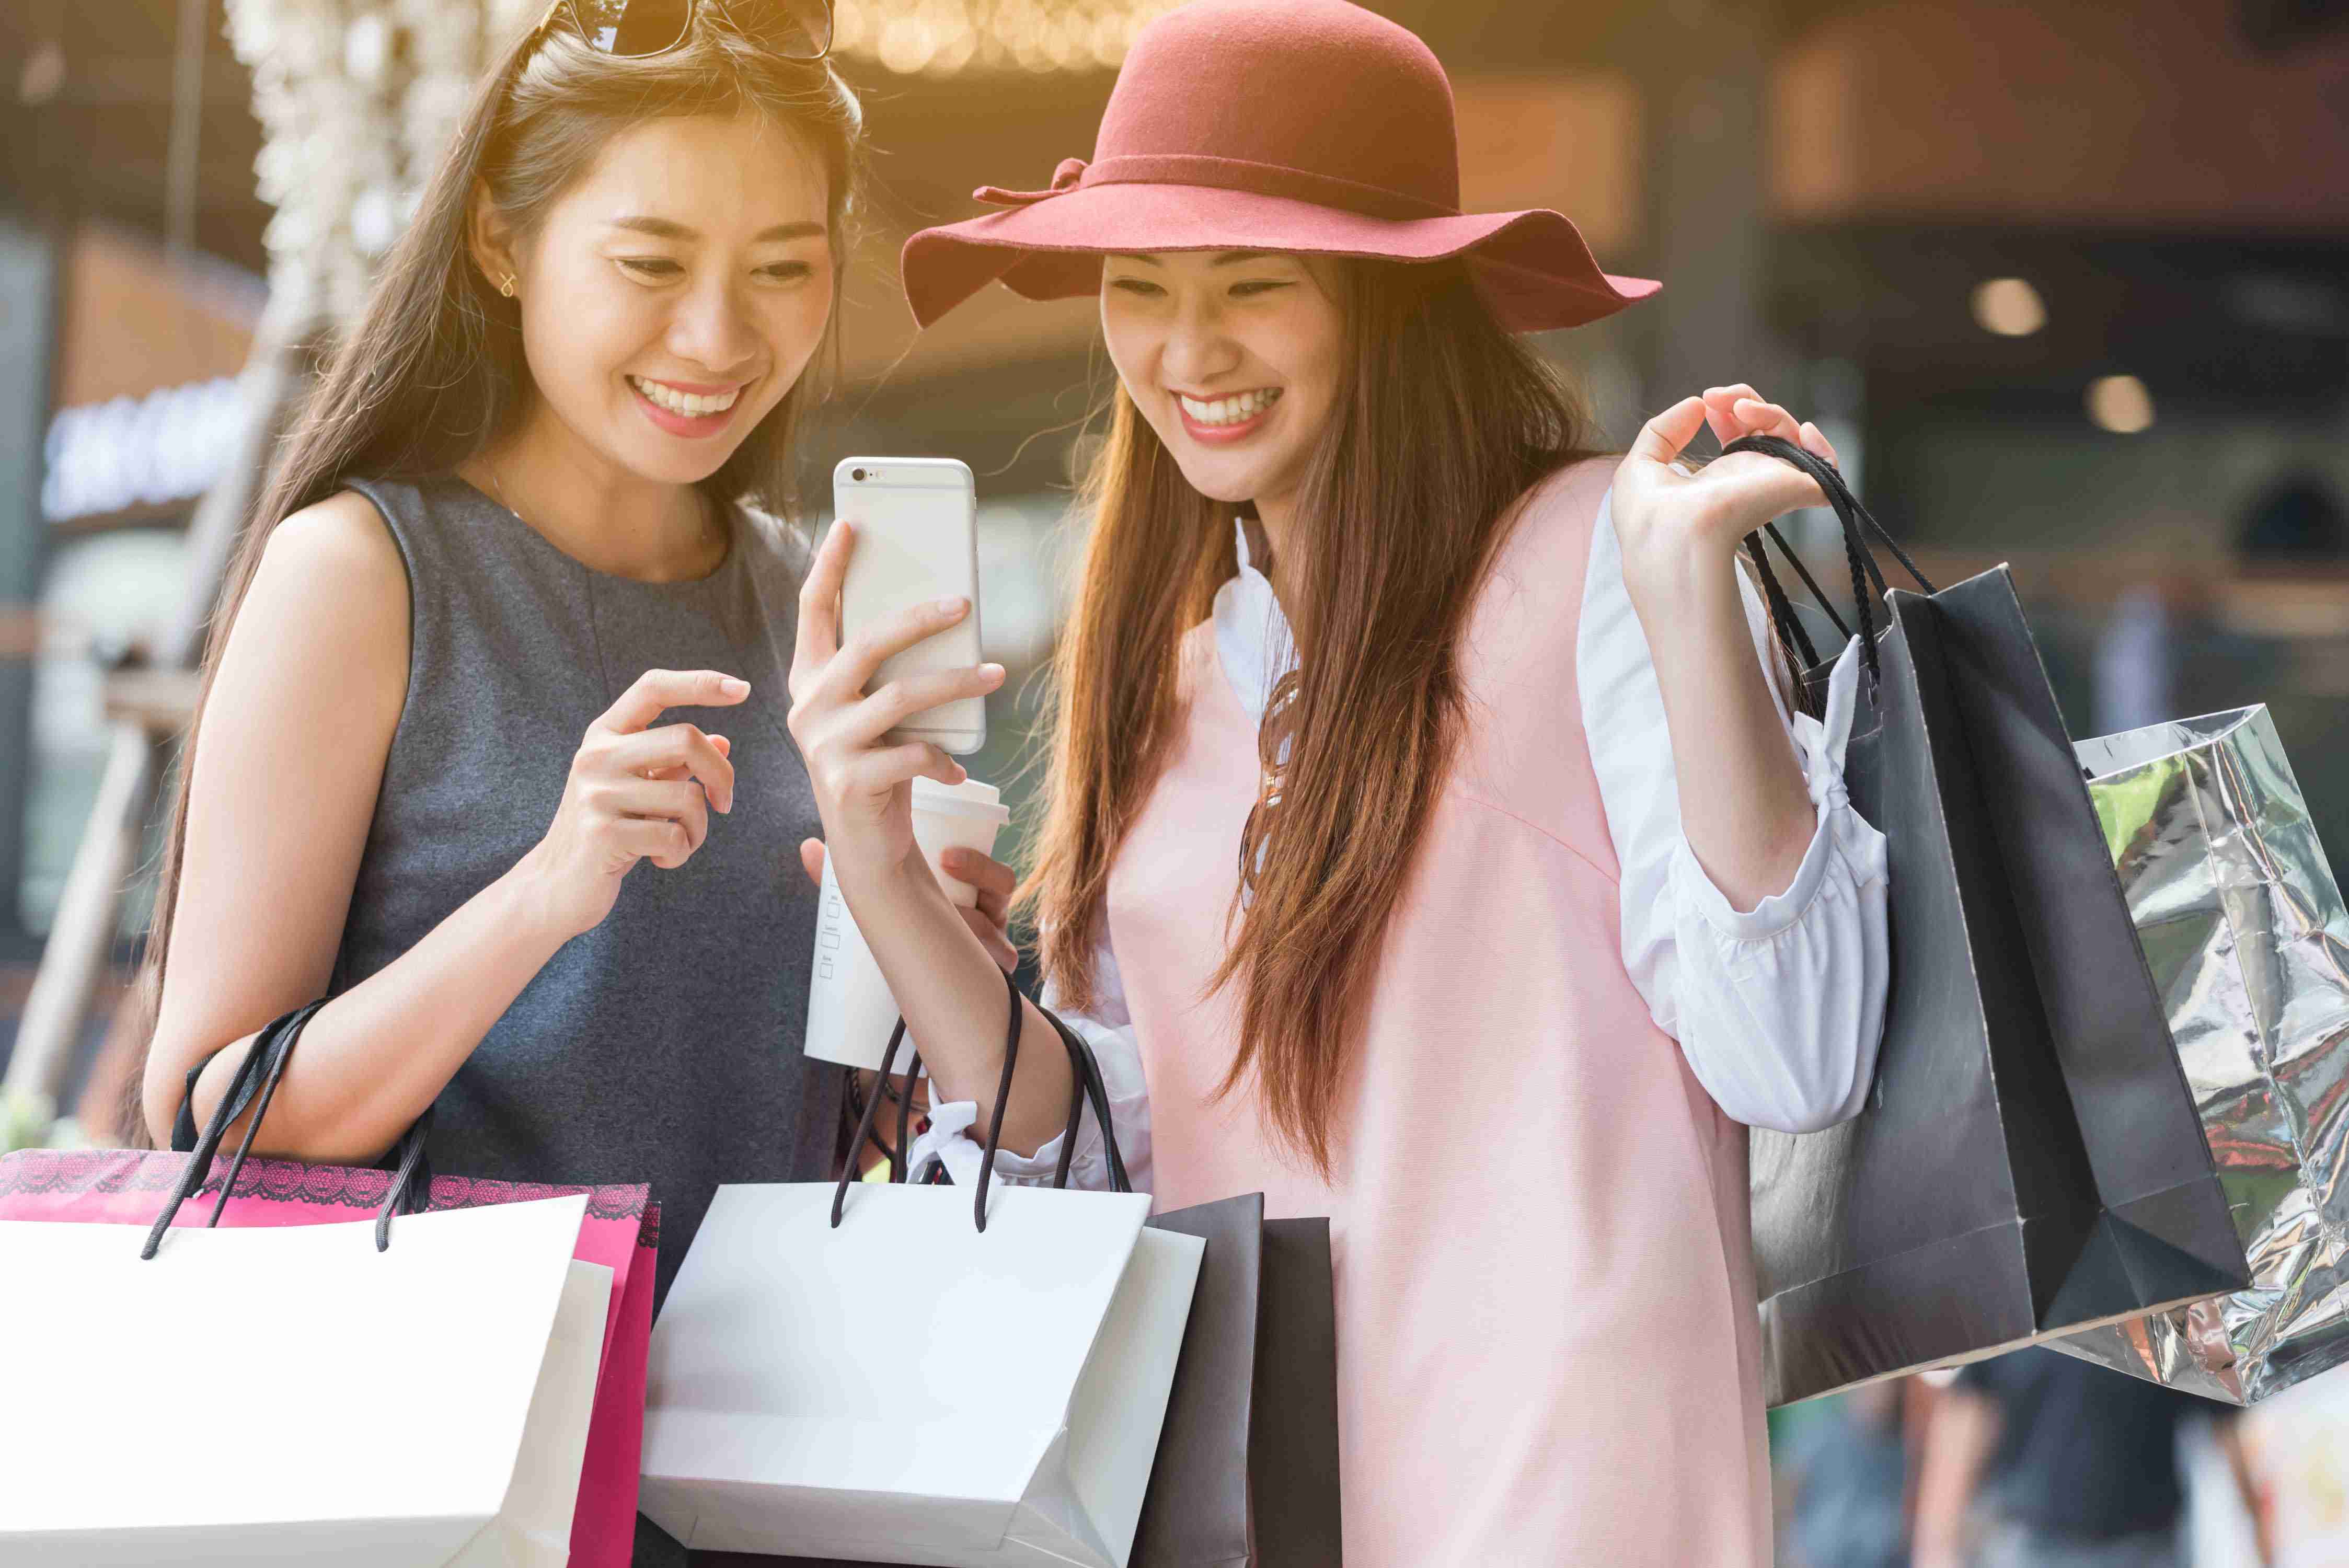 Retail & lifestyle rewards that provide every-day value